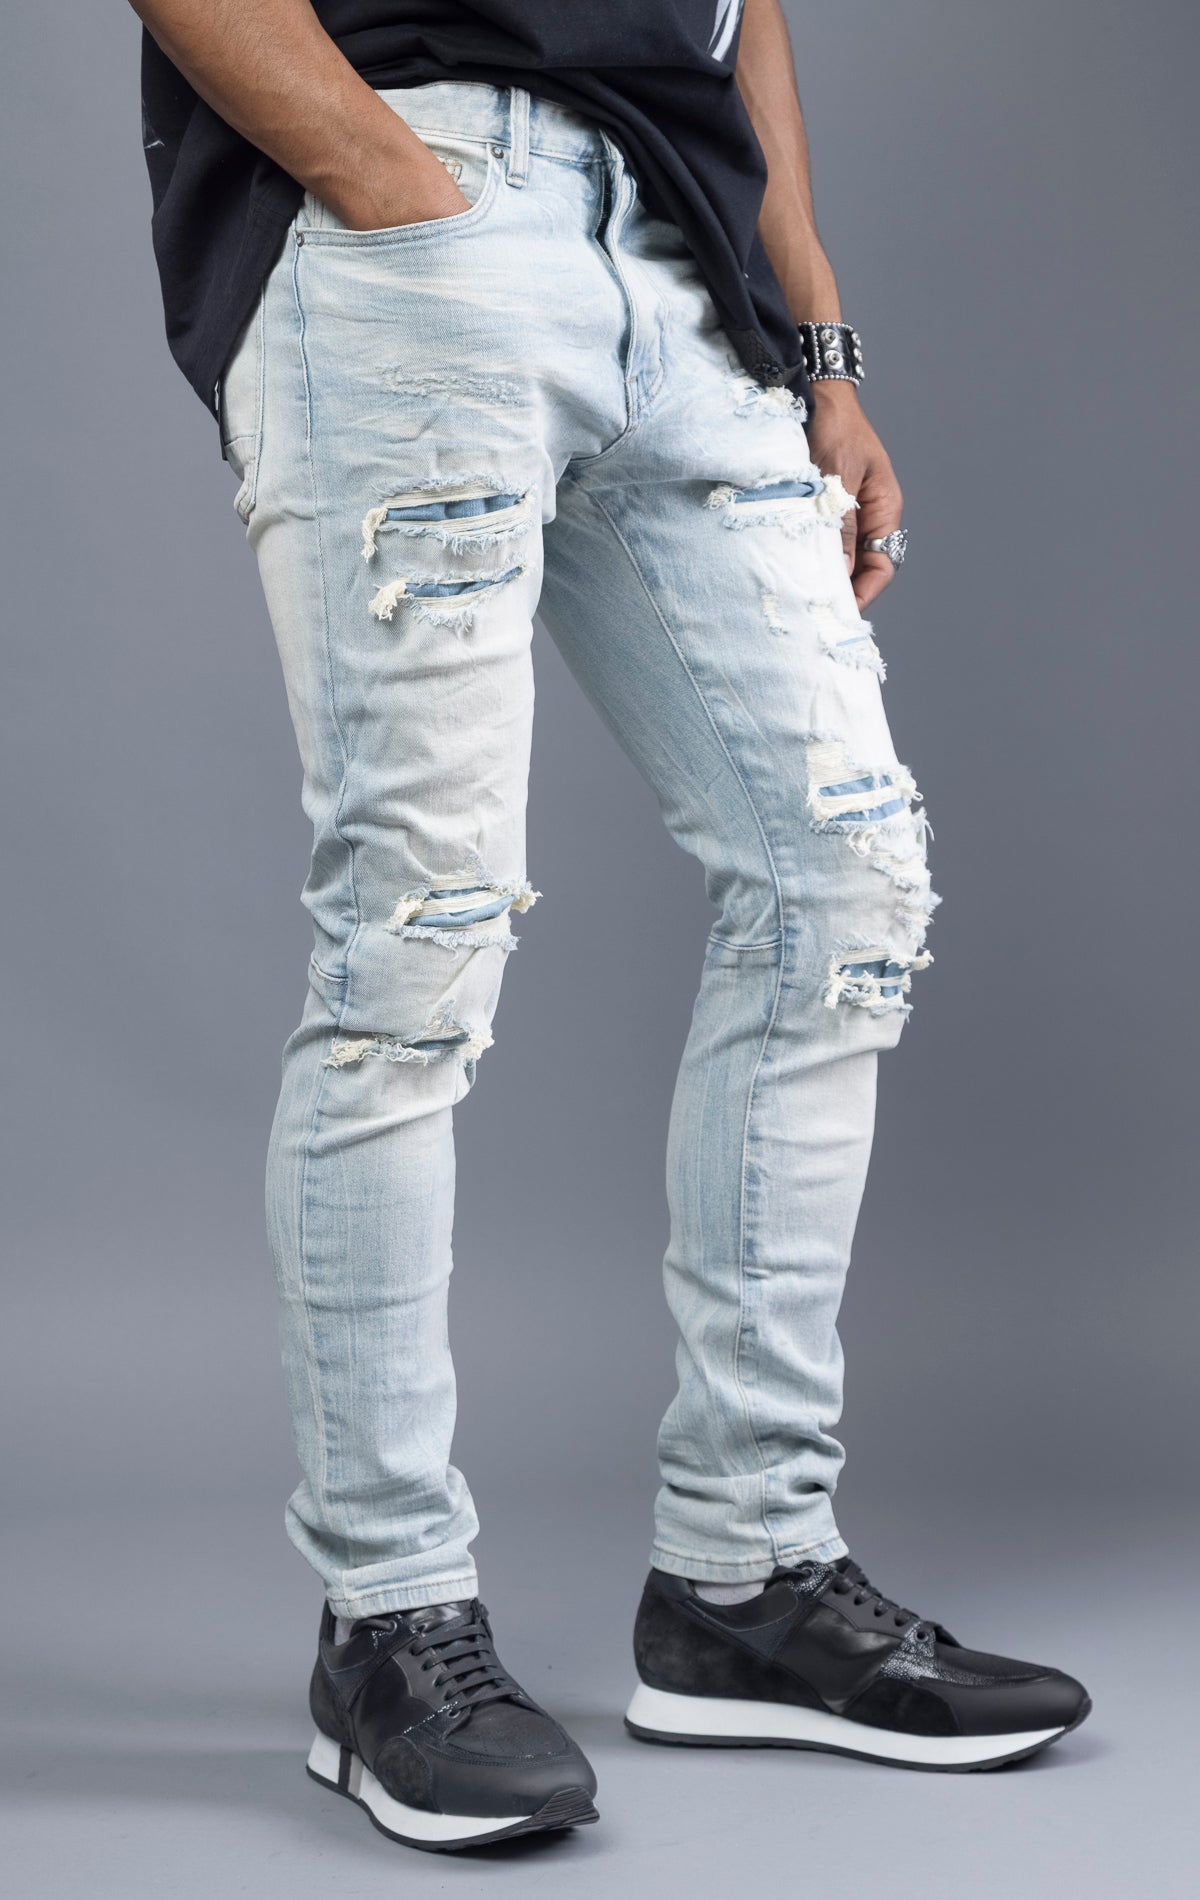 Light blue, slim-fit denim jeans with ripped and repaired patches throughout. Made with stretchy denim fabric for a comfortable fit. (98% cotton, 2% elastane)